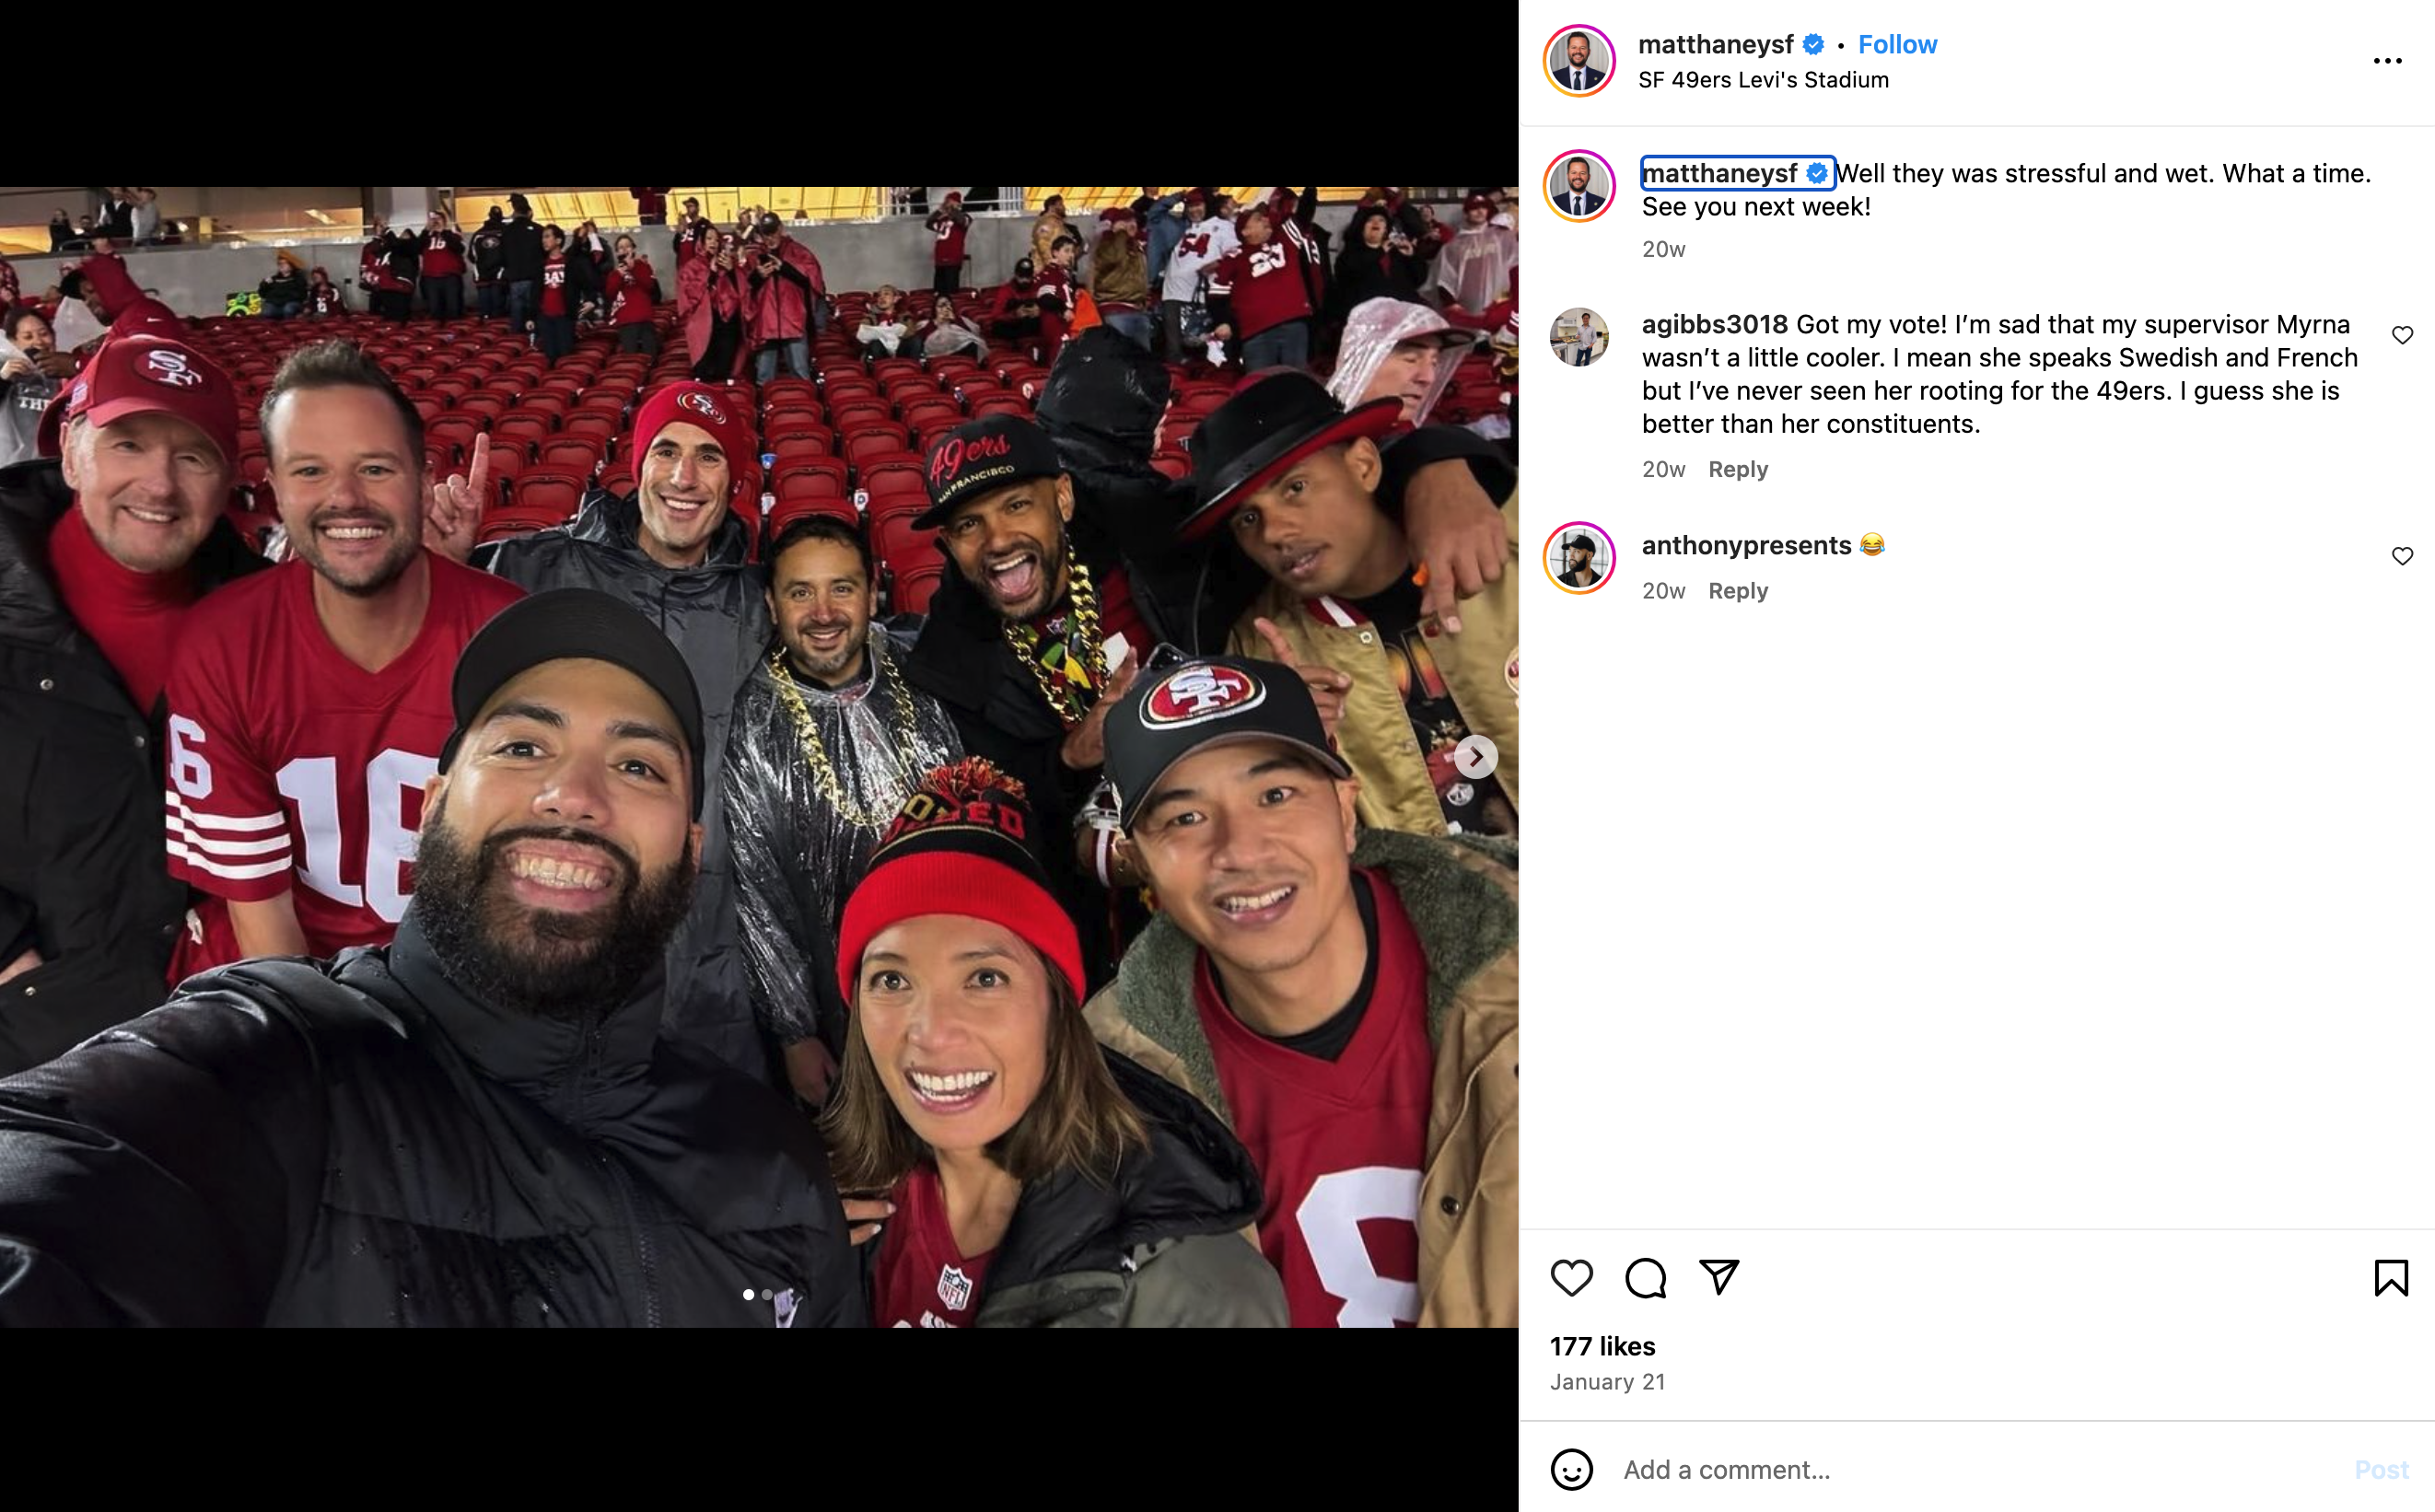 A group of nine people is smiling and posing for a selfie at a sports stadium. They are wearing 49ers gear, and the stands in the background have scattered fans.